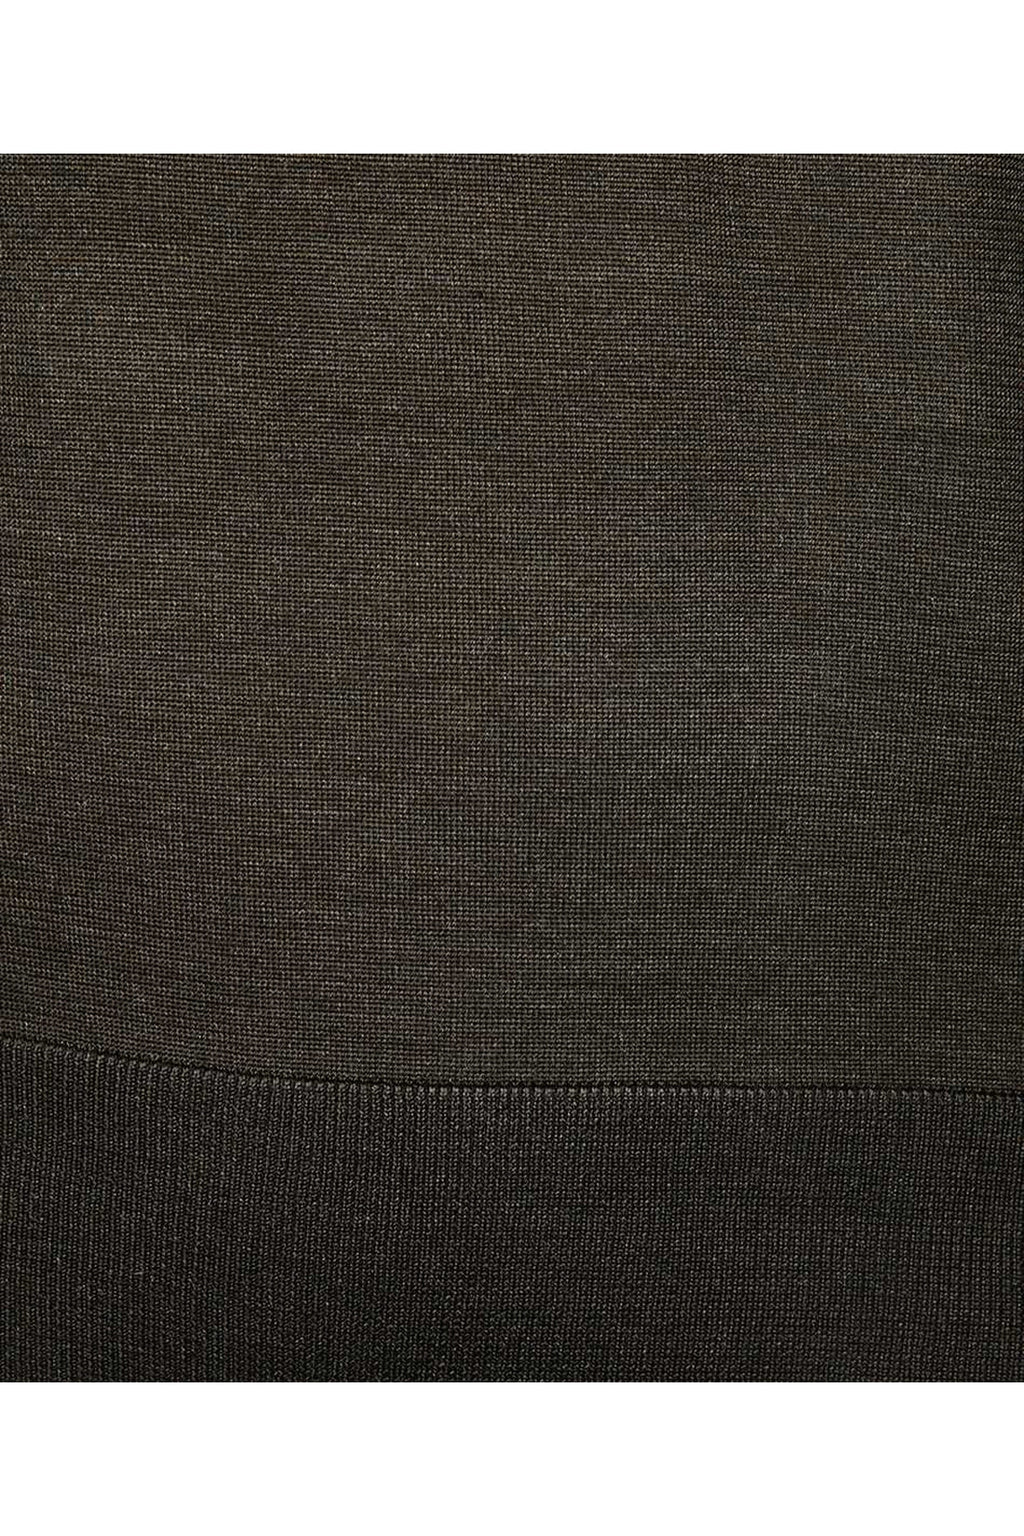 Tom Ford-OUTLET-SALE-Silk crew-neck sweater-ARCHIVIST